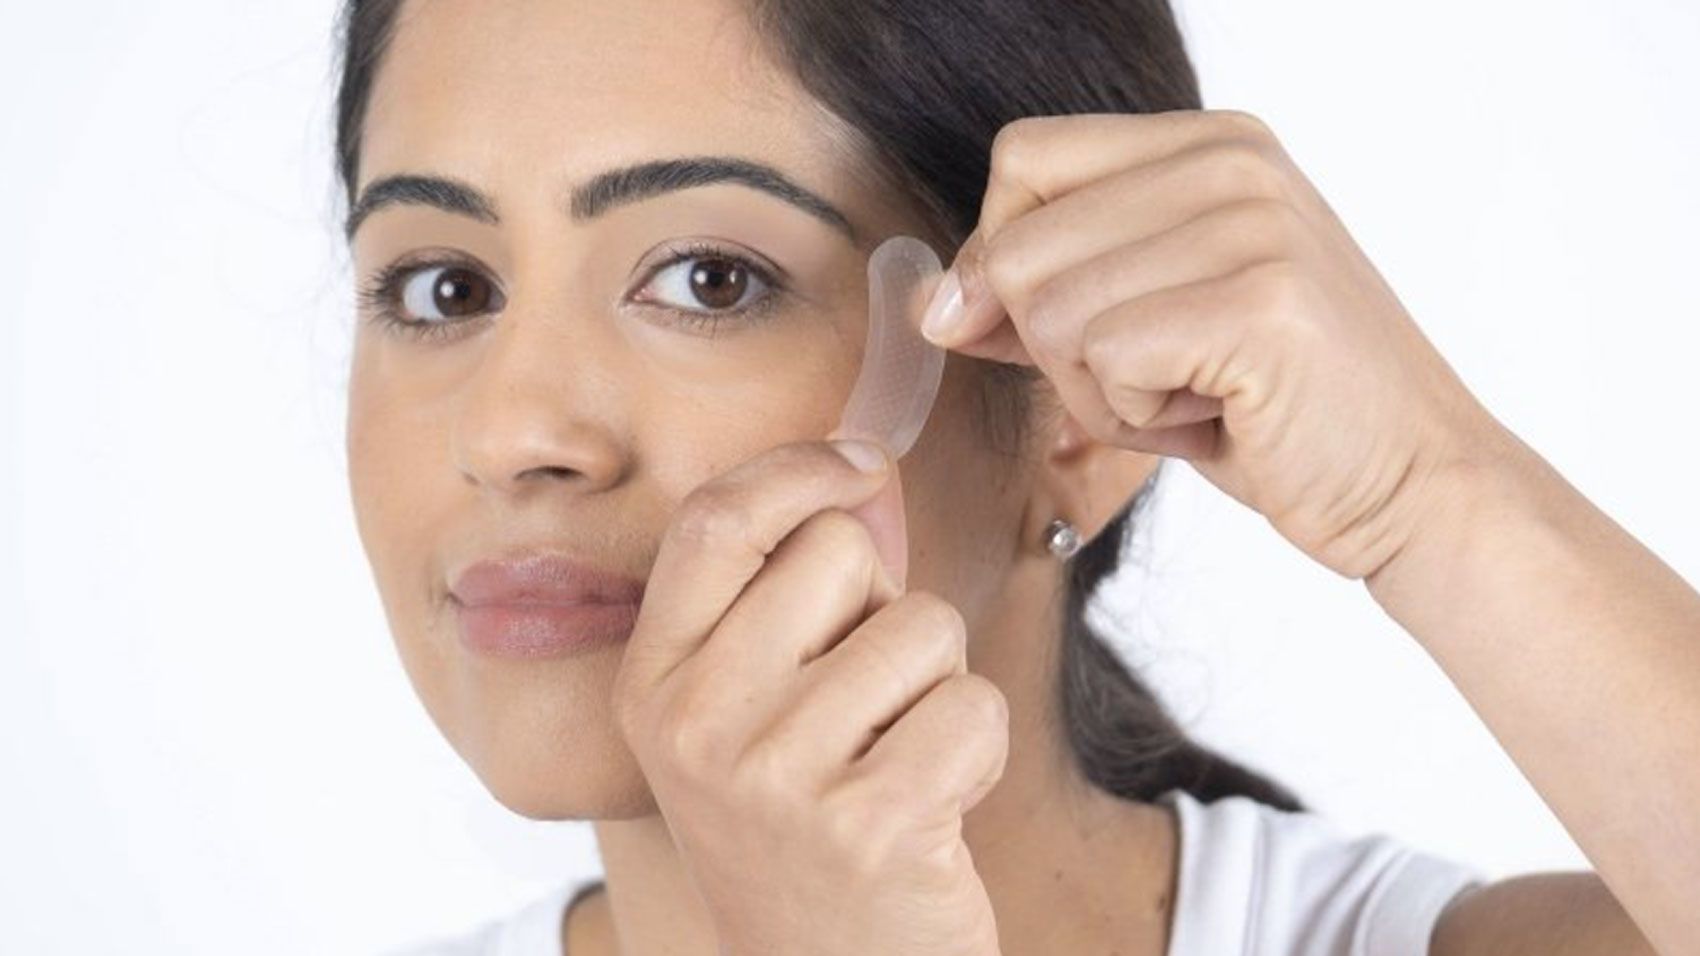 CNN Botox alternative Learn more patch this | review: Wrinkle skin about Underscored care